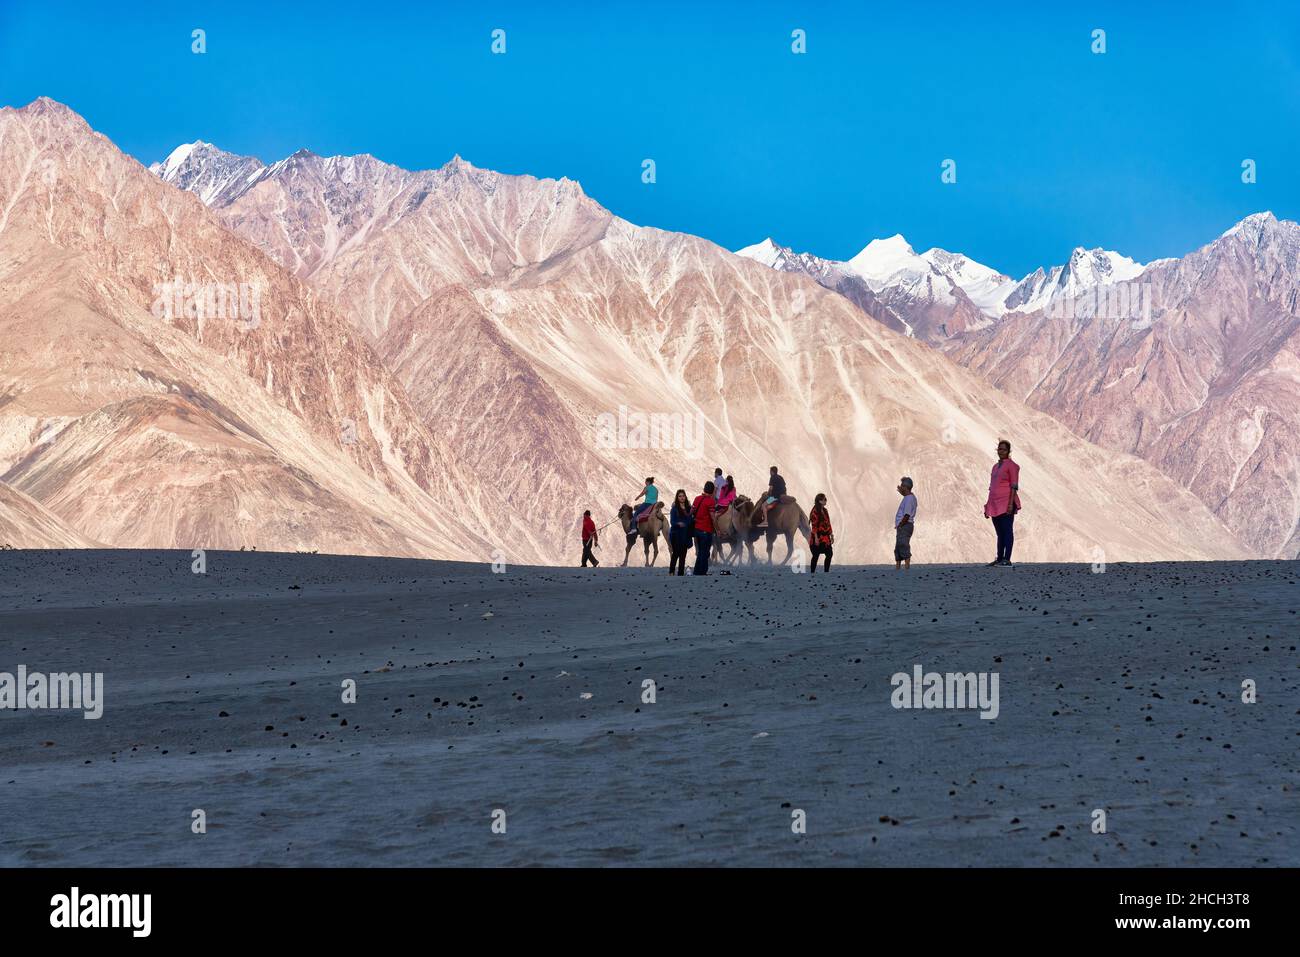 Hunder, India - August 19, 2015: Group of people riding bactrian camels in Sand Dunes in Nubra Valley. Bactrian camels are native to the steppes Stock Photo